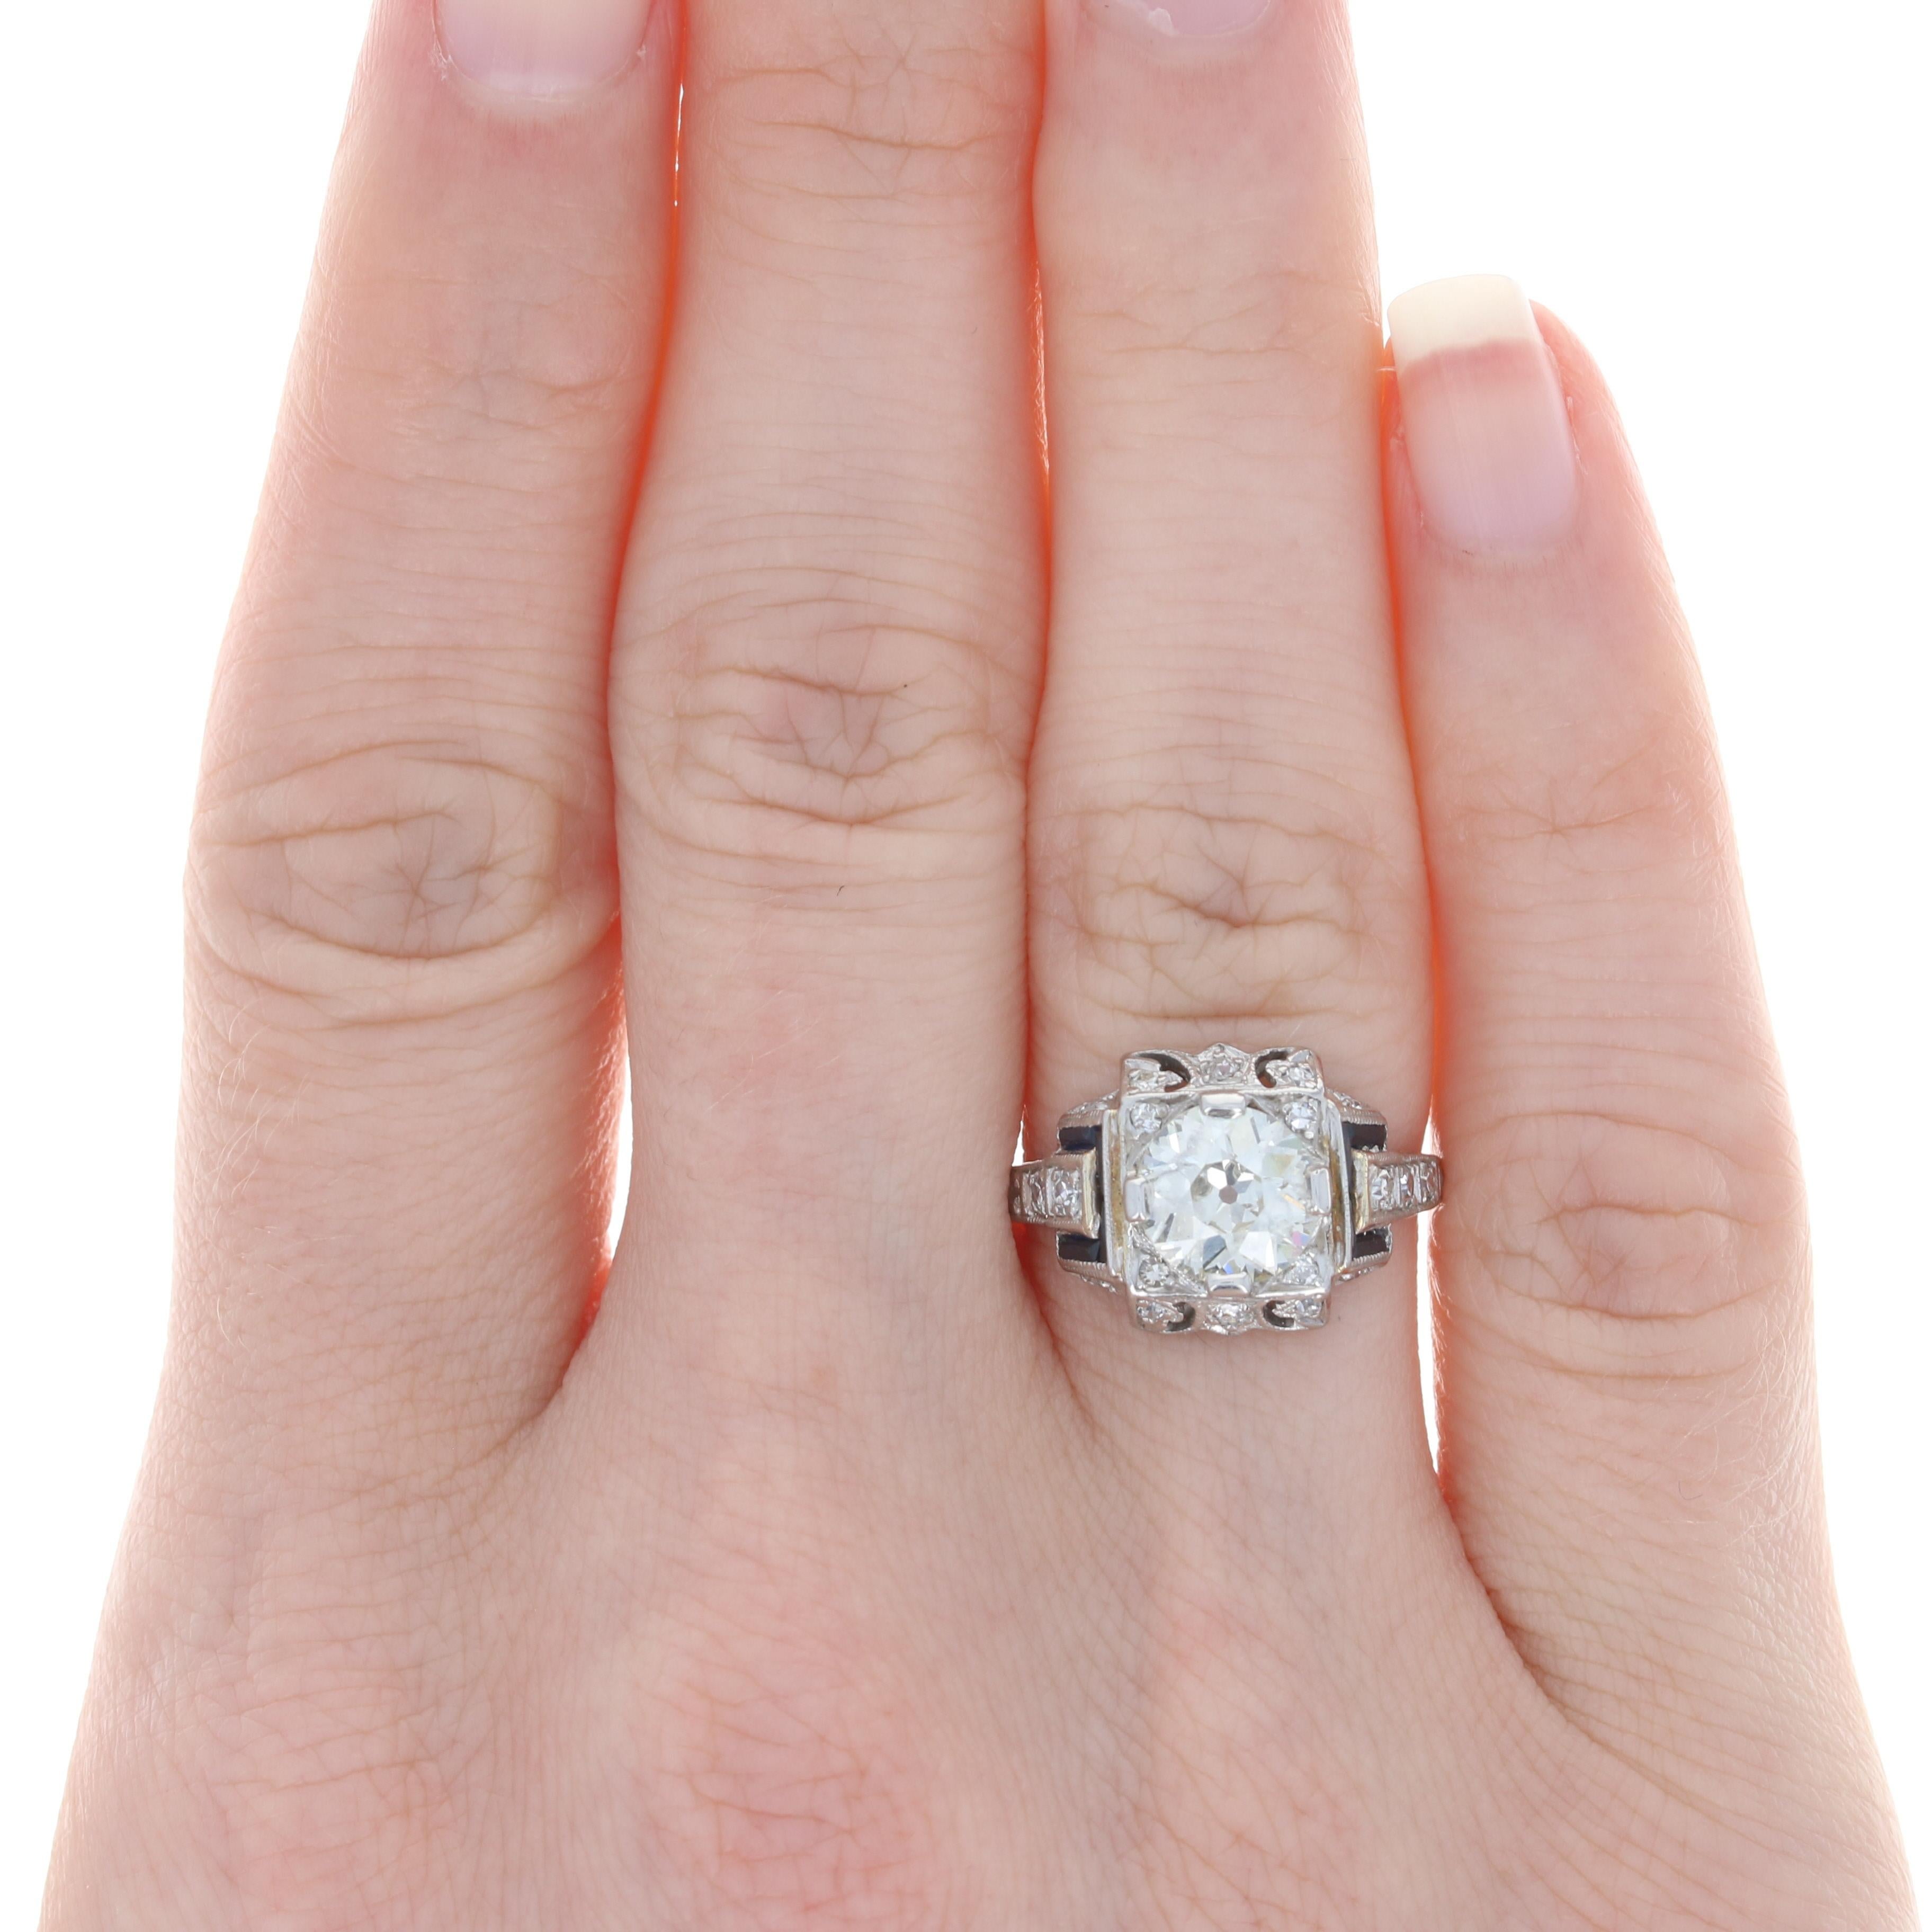 Put the sparkle into your special someone's eyes when you propose with this gorgeous Art Deco Era ring! Fashioned in platinum, a precious metal highly prized for its strength and enduring beauty. this vintage piece features natural diamonds and